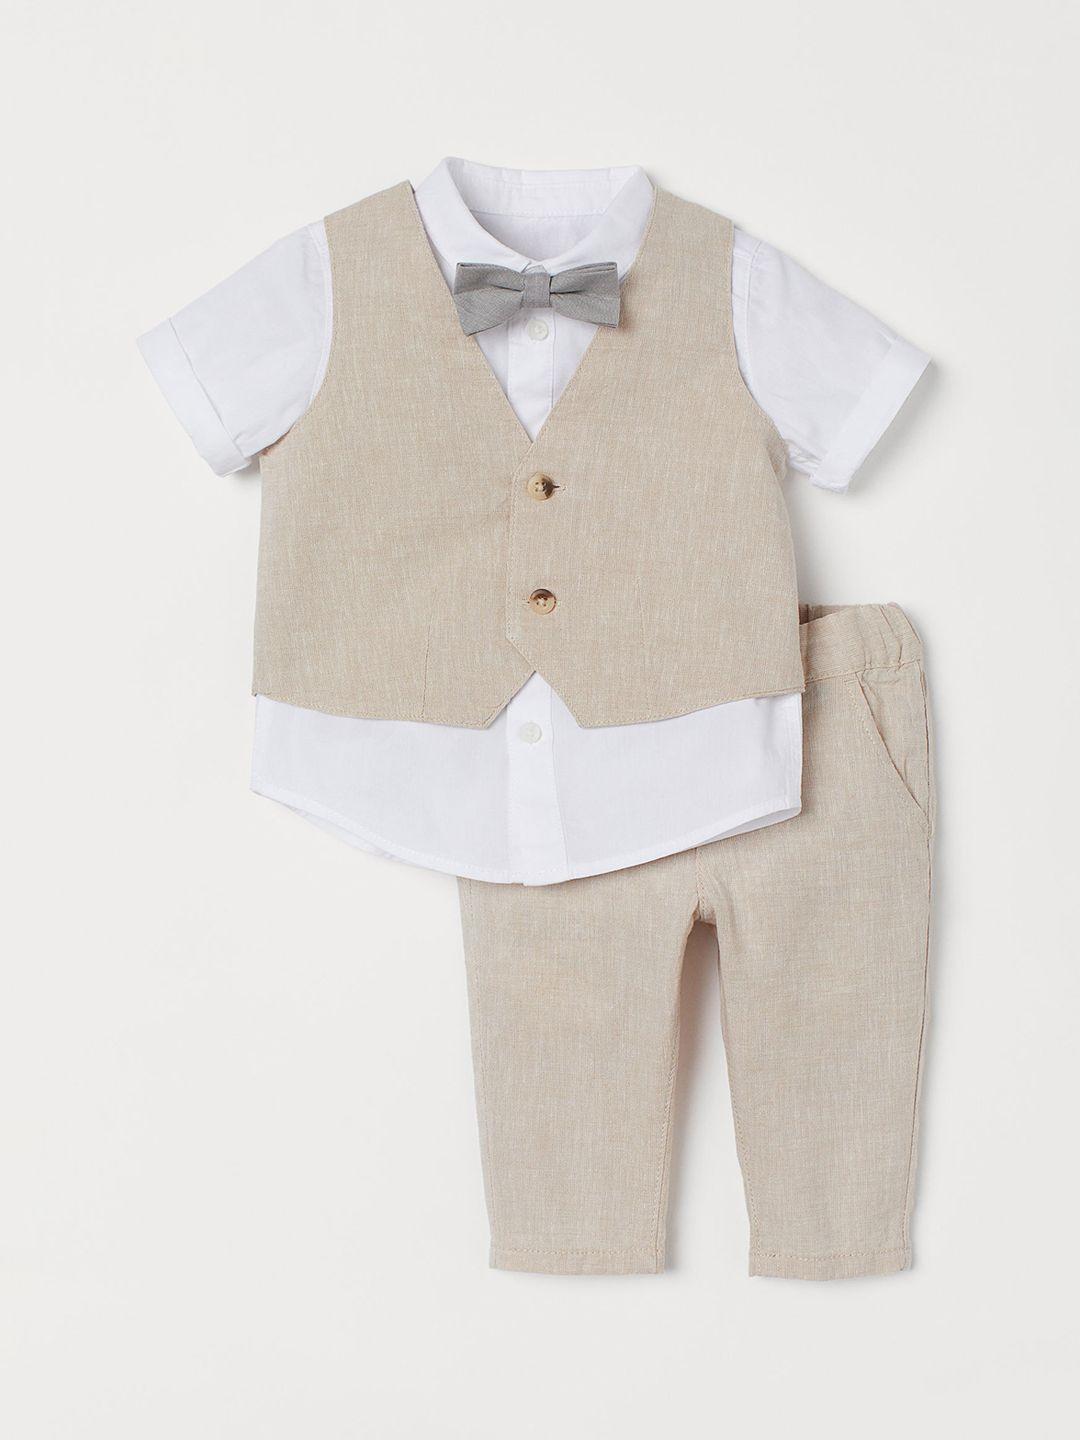 h&m boys 3-piece white & beige clothing set with a bow tie